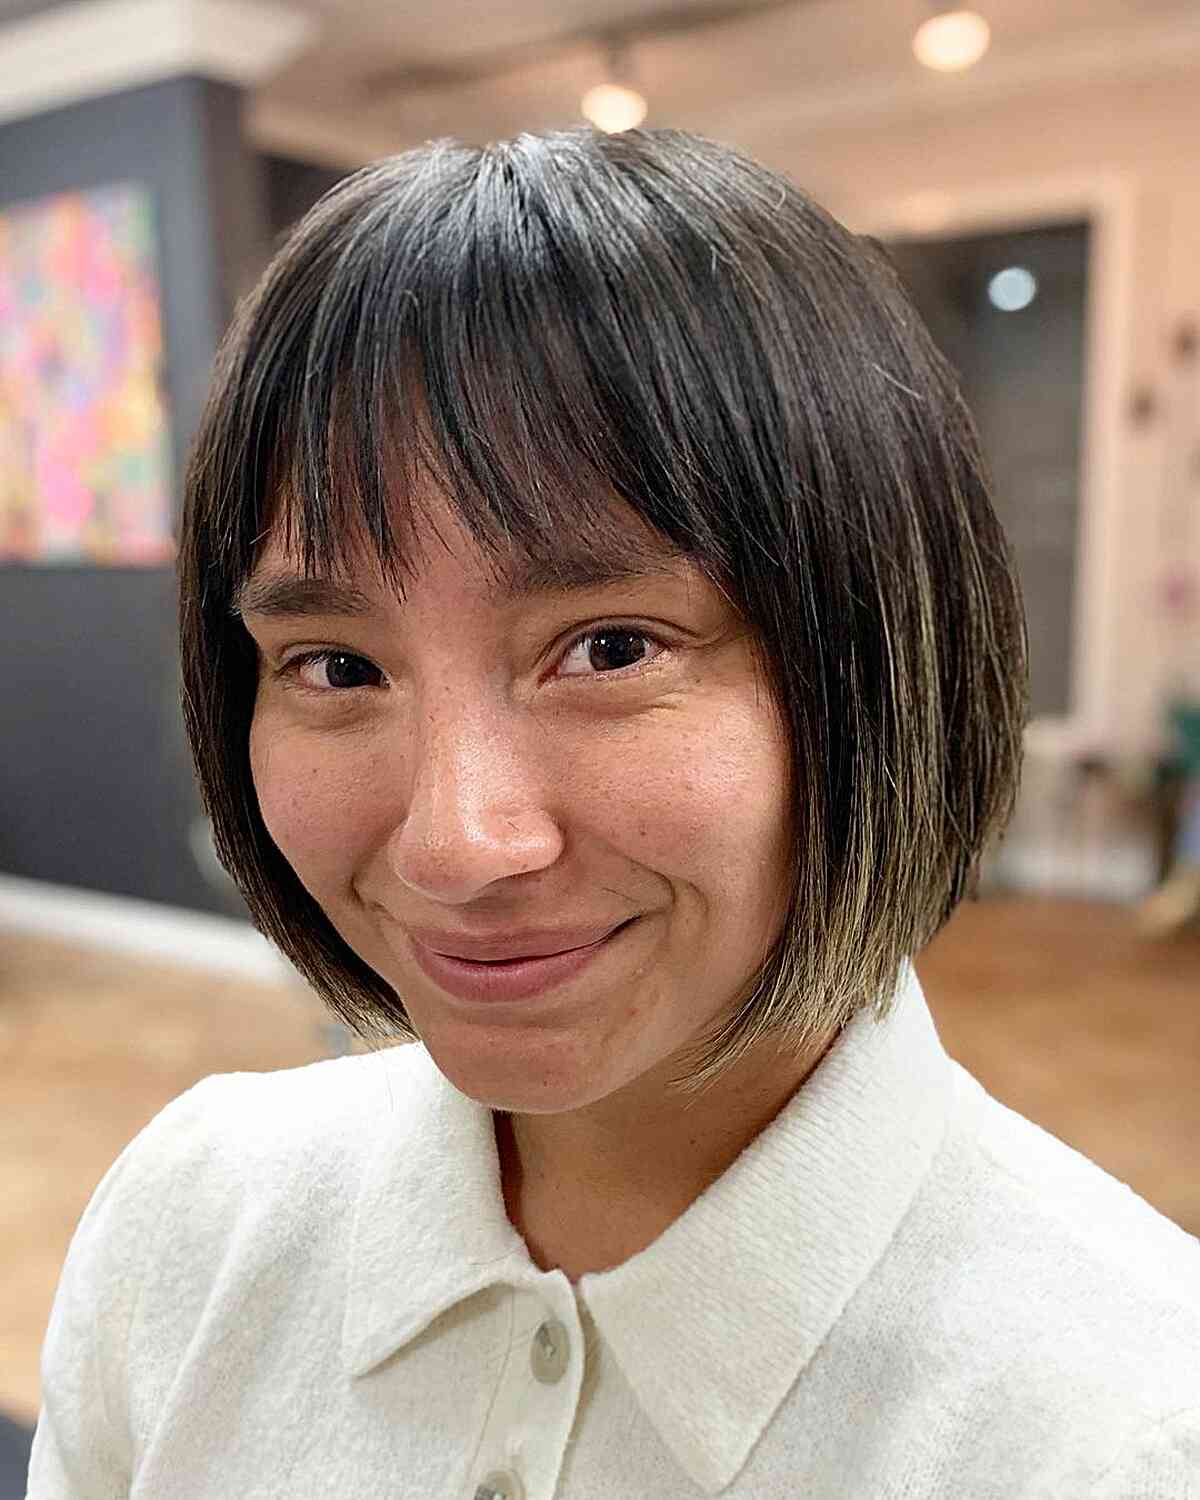 Jagged Bangs for Round Bobbed Hair on Round-Shaped Faces